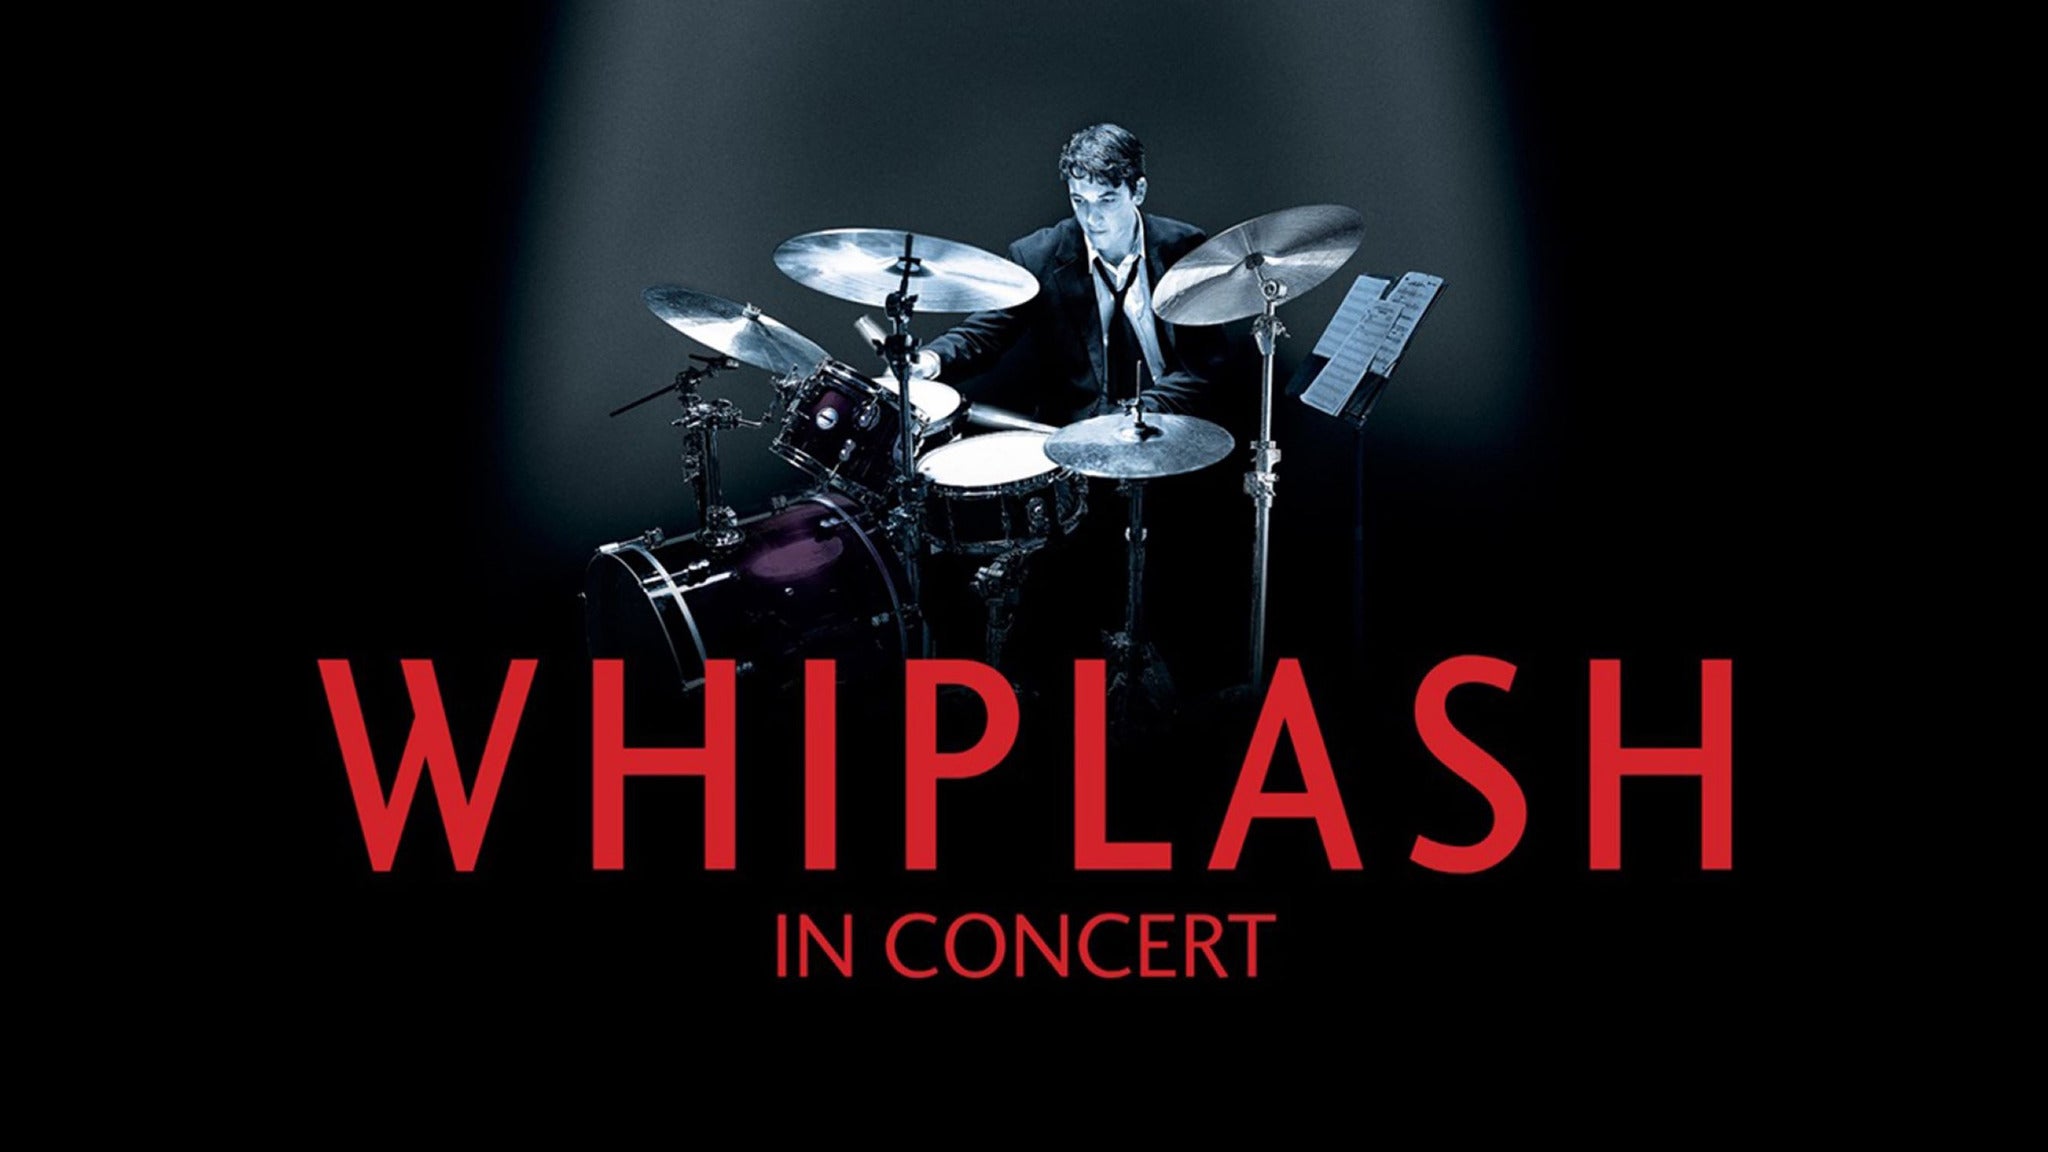 Whiplash in Concert at Centre in the Square